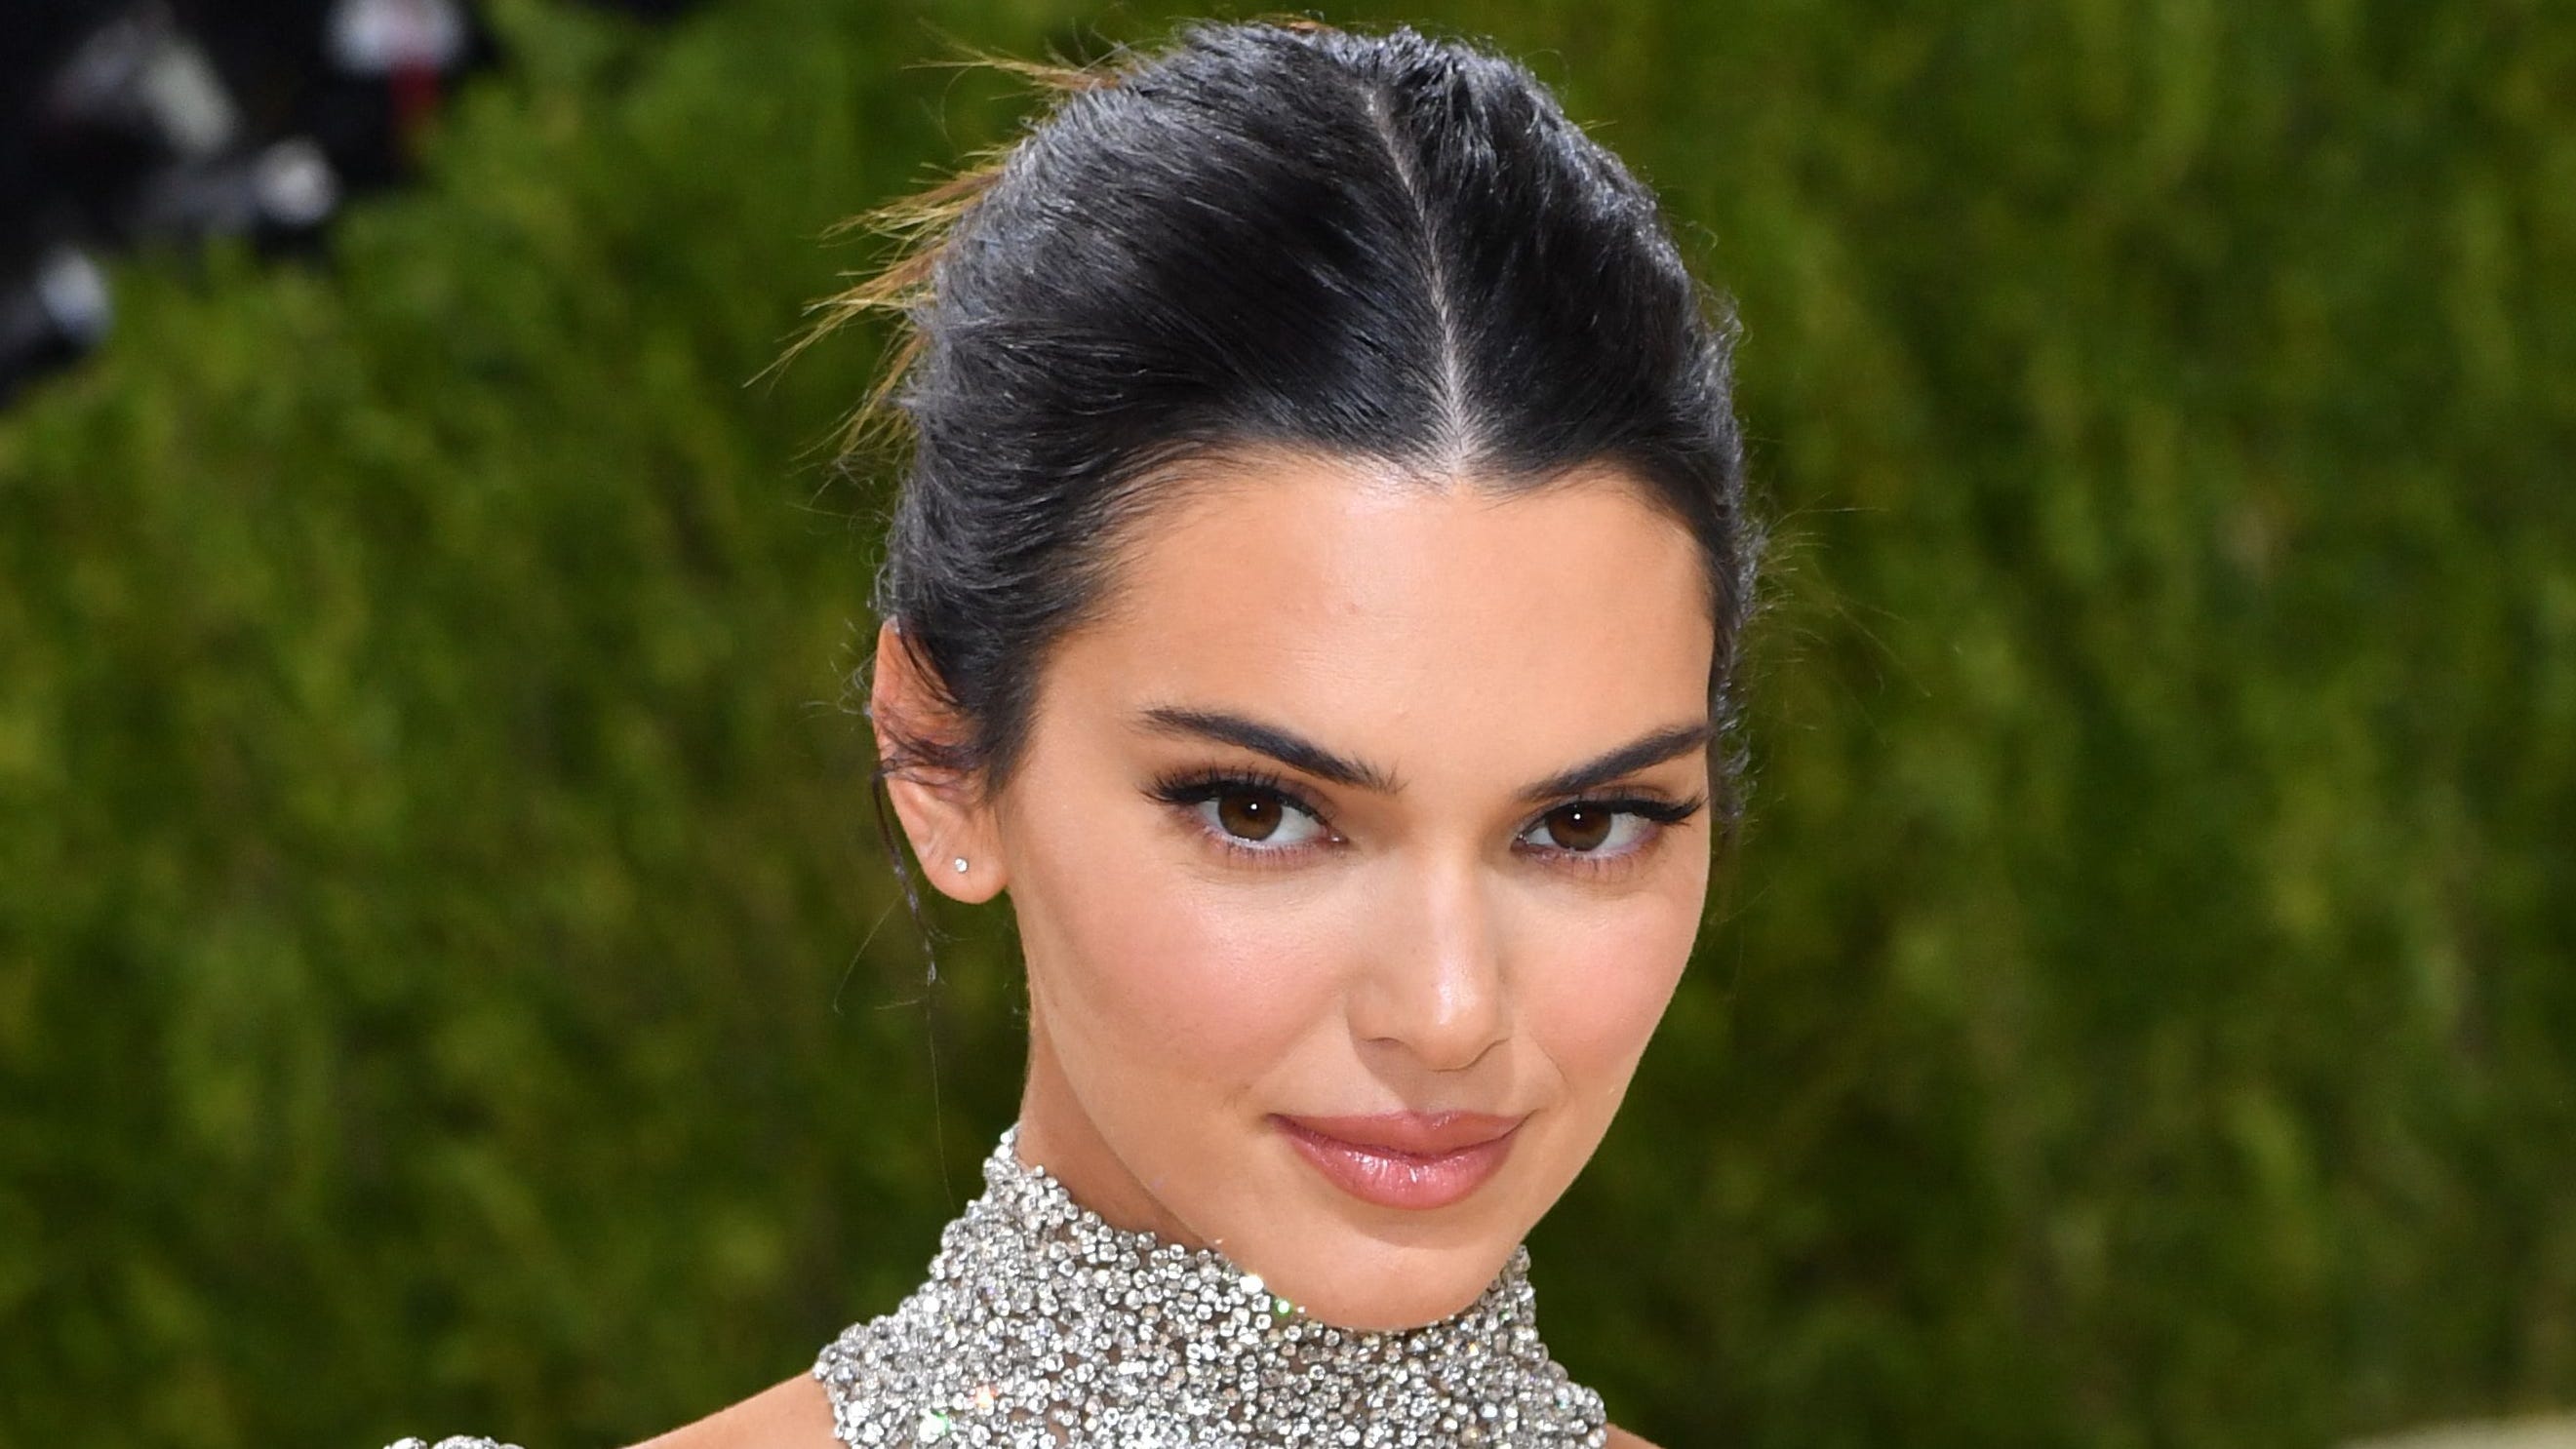 Kendall Jenner's wedding guest dress criticized as inappropriate